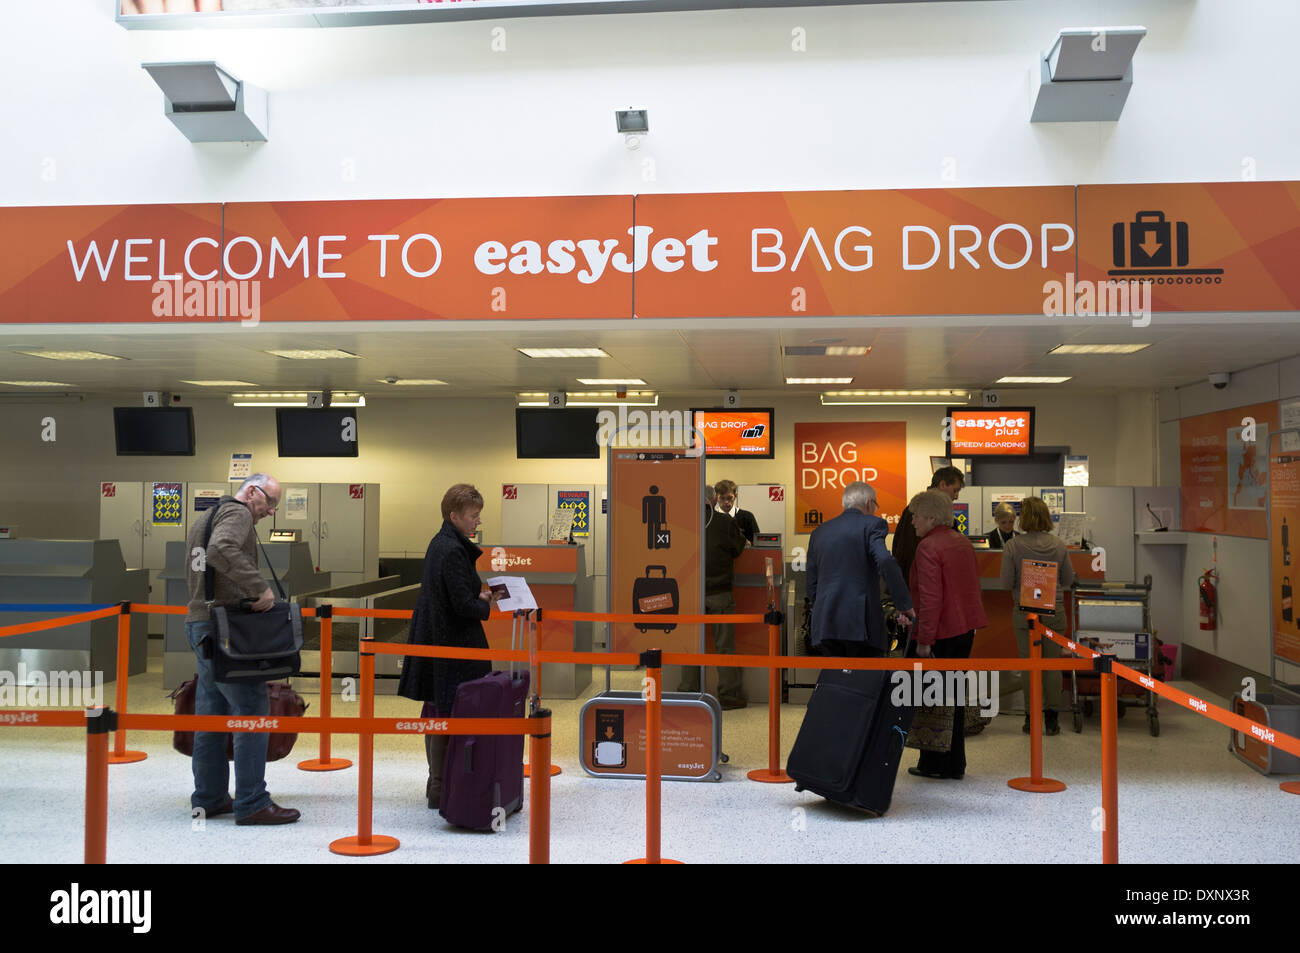 dh Airport INVERNESS INVERNESSSHIRE EasyJet Bag Drop passengers checkin air flight luggage check in Scotland uk checking baggage desk airports Stock Photo